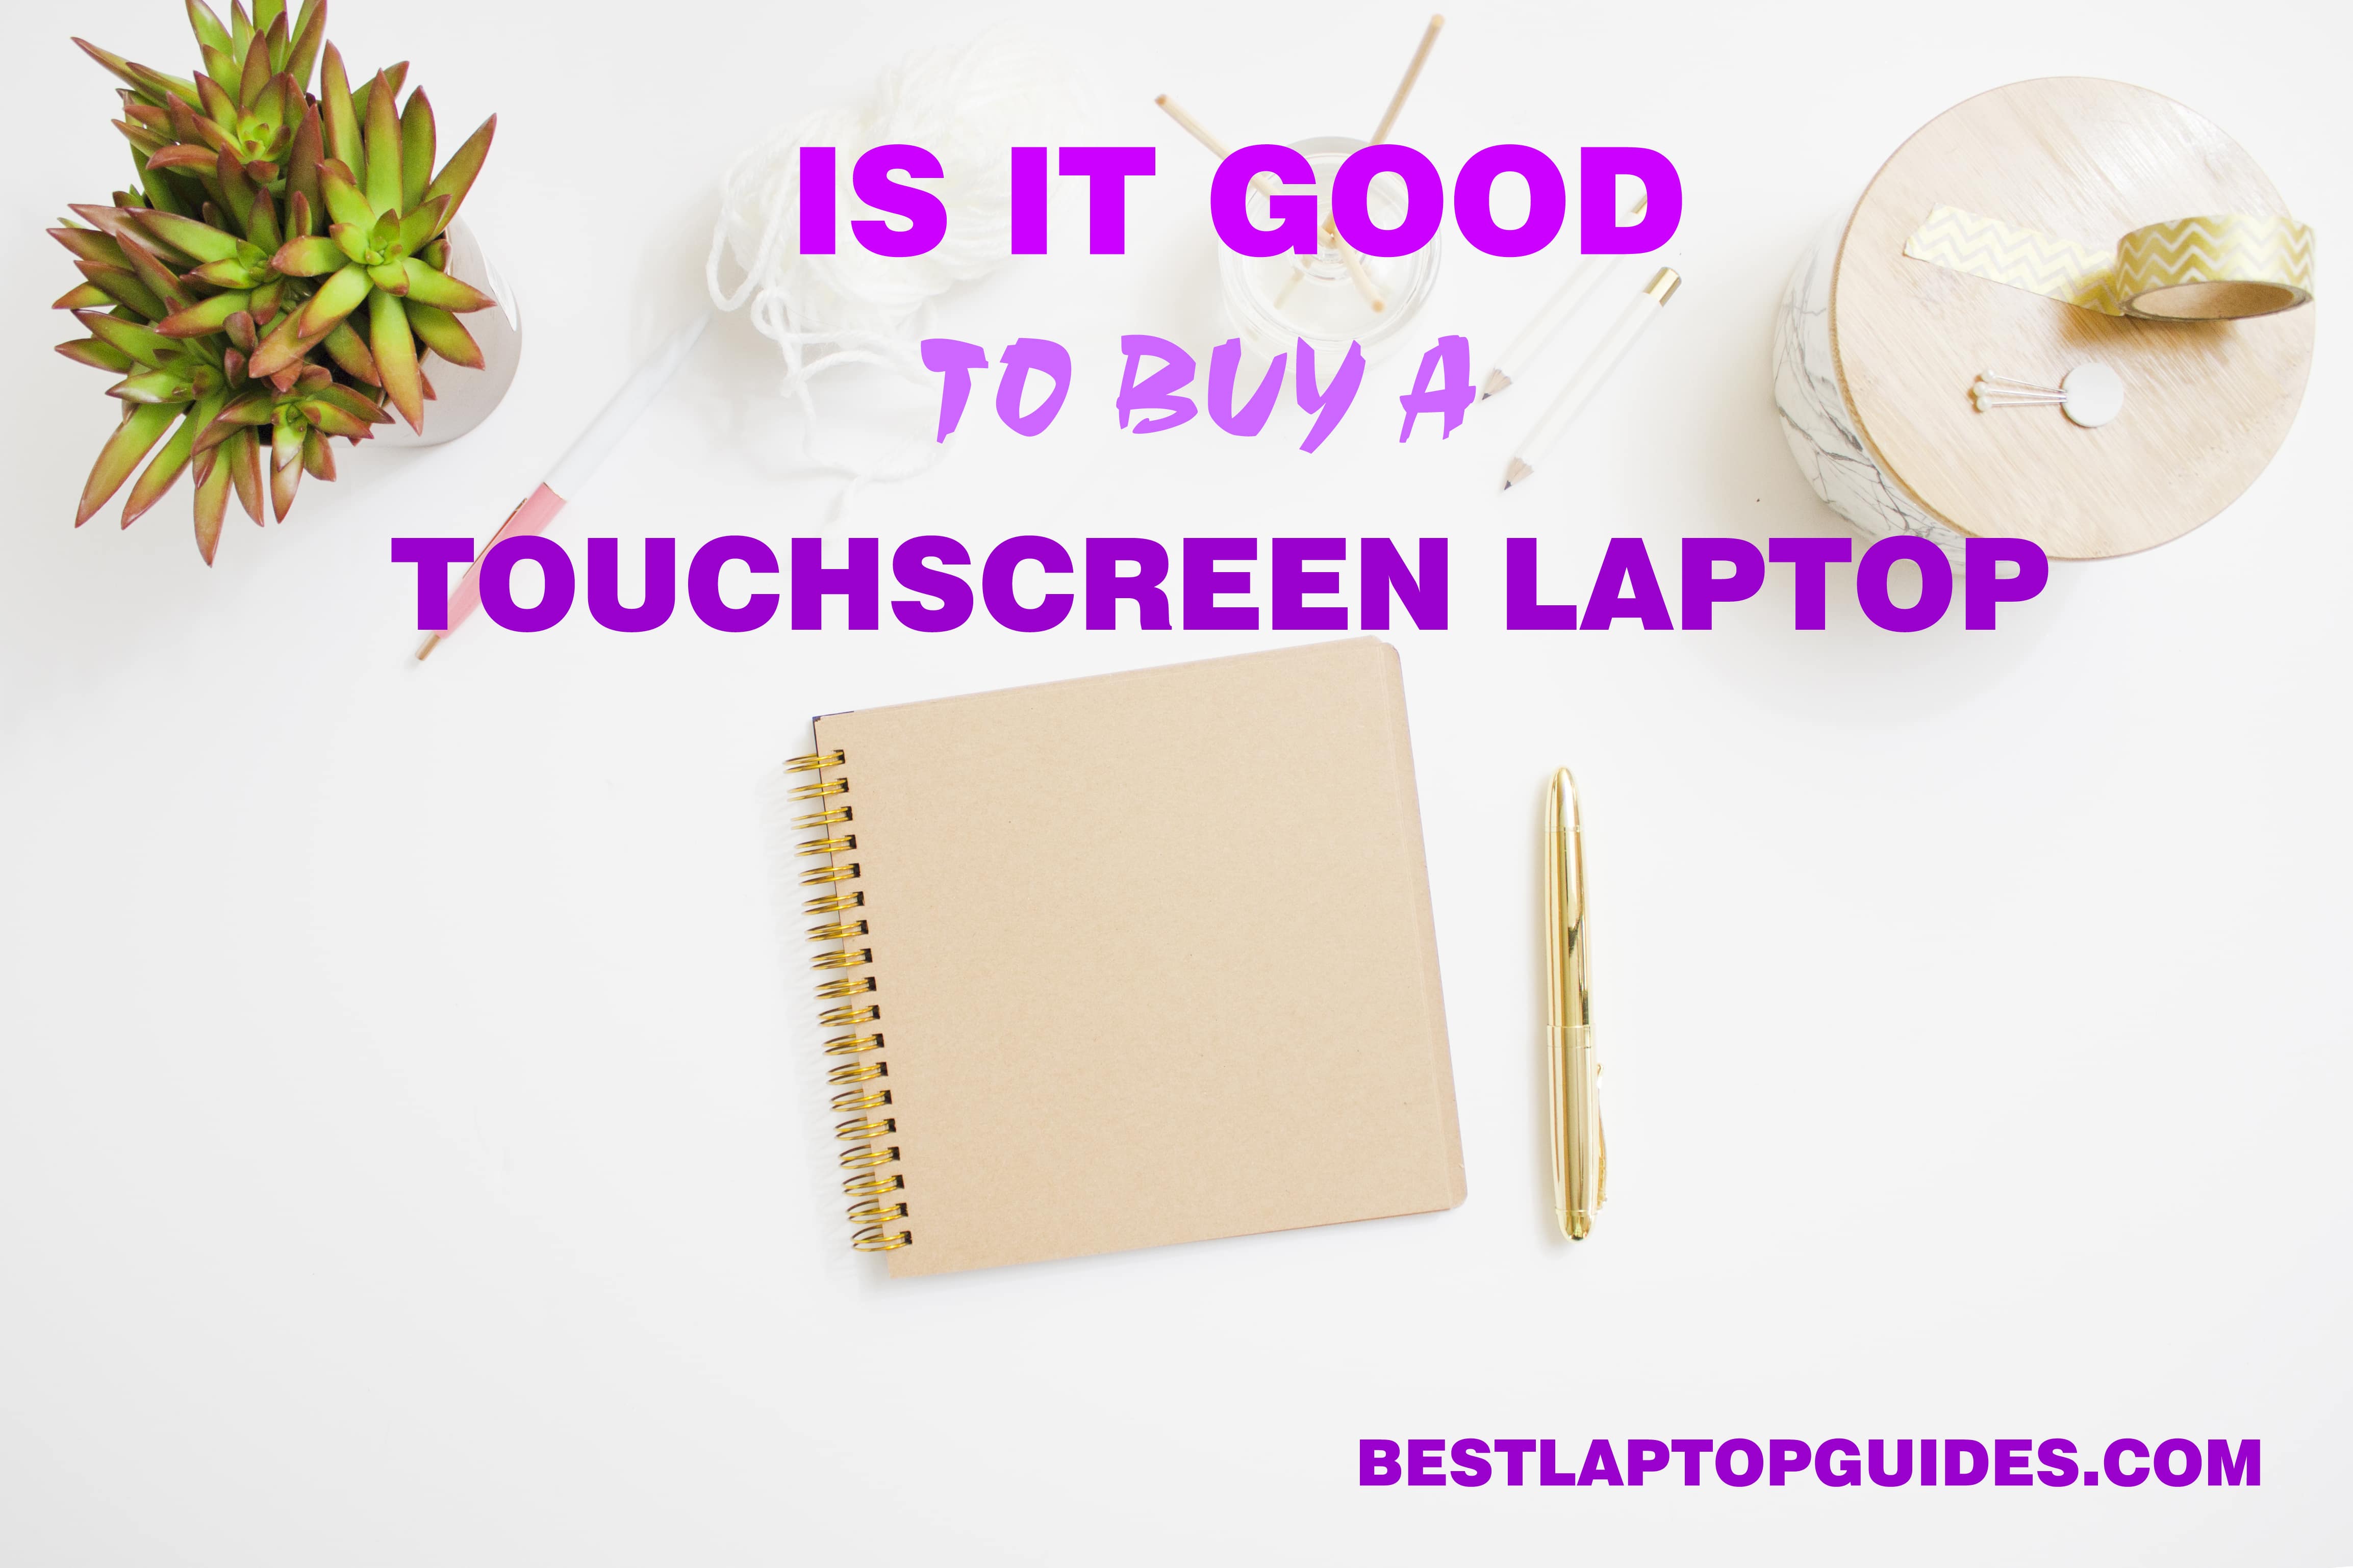 Is it good to buy a touchscreen laptop